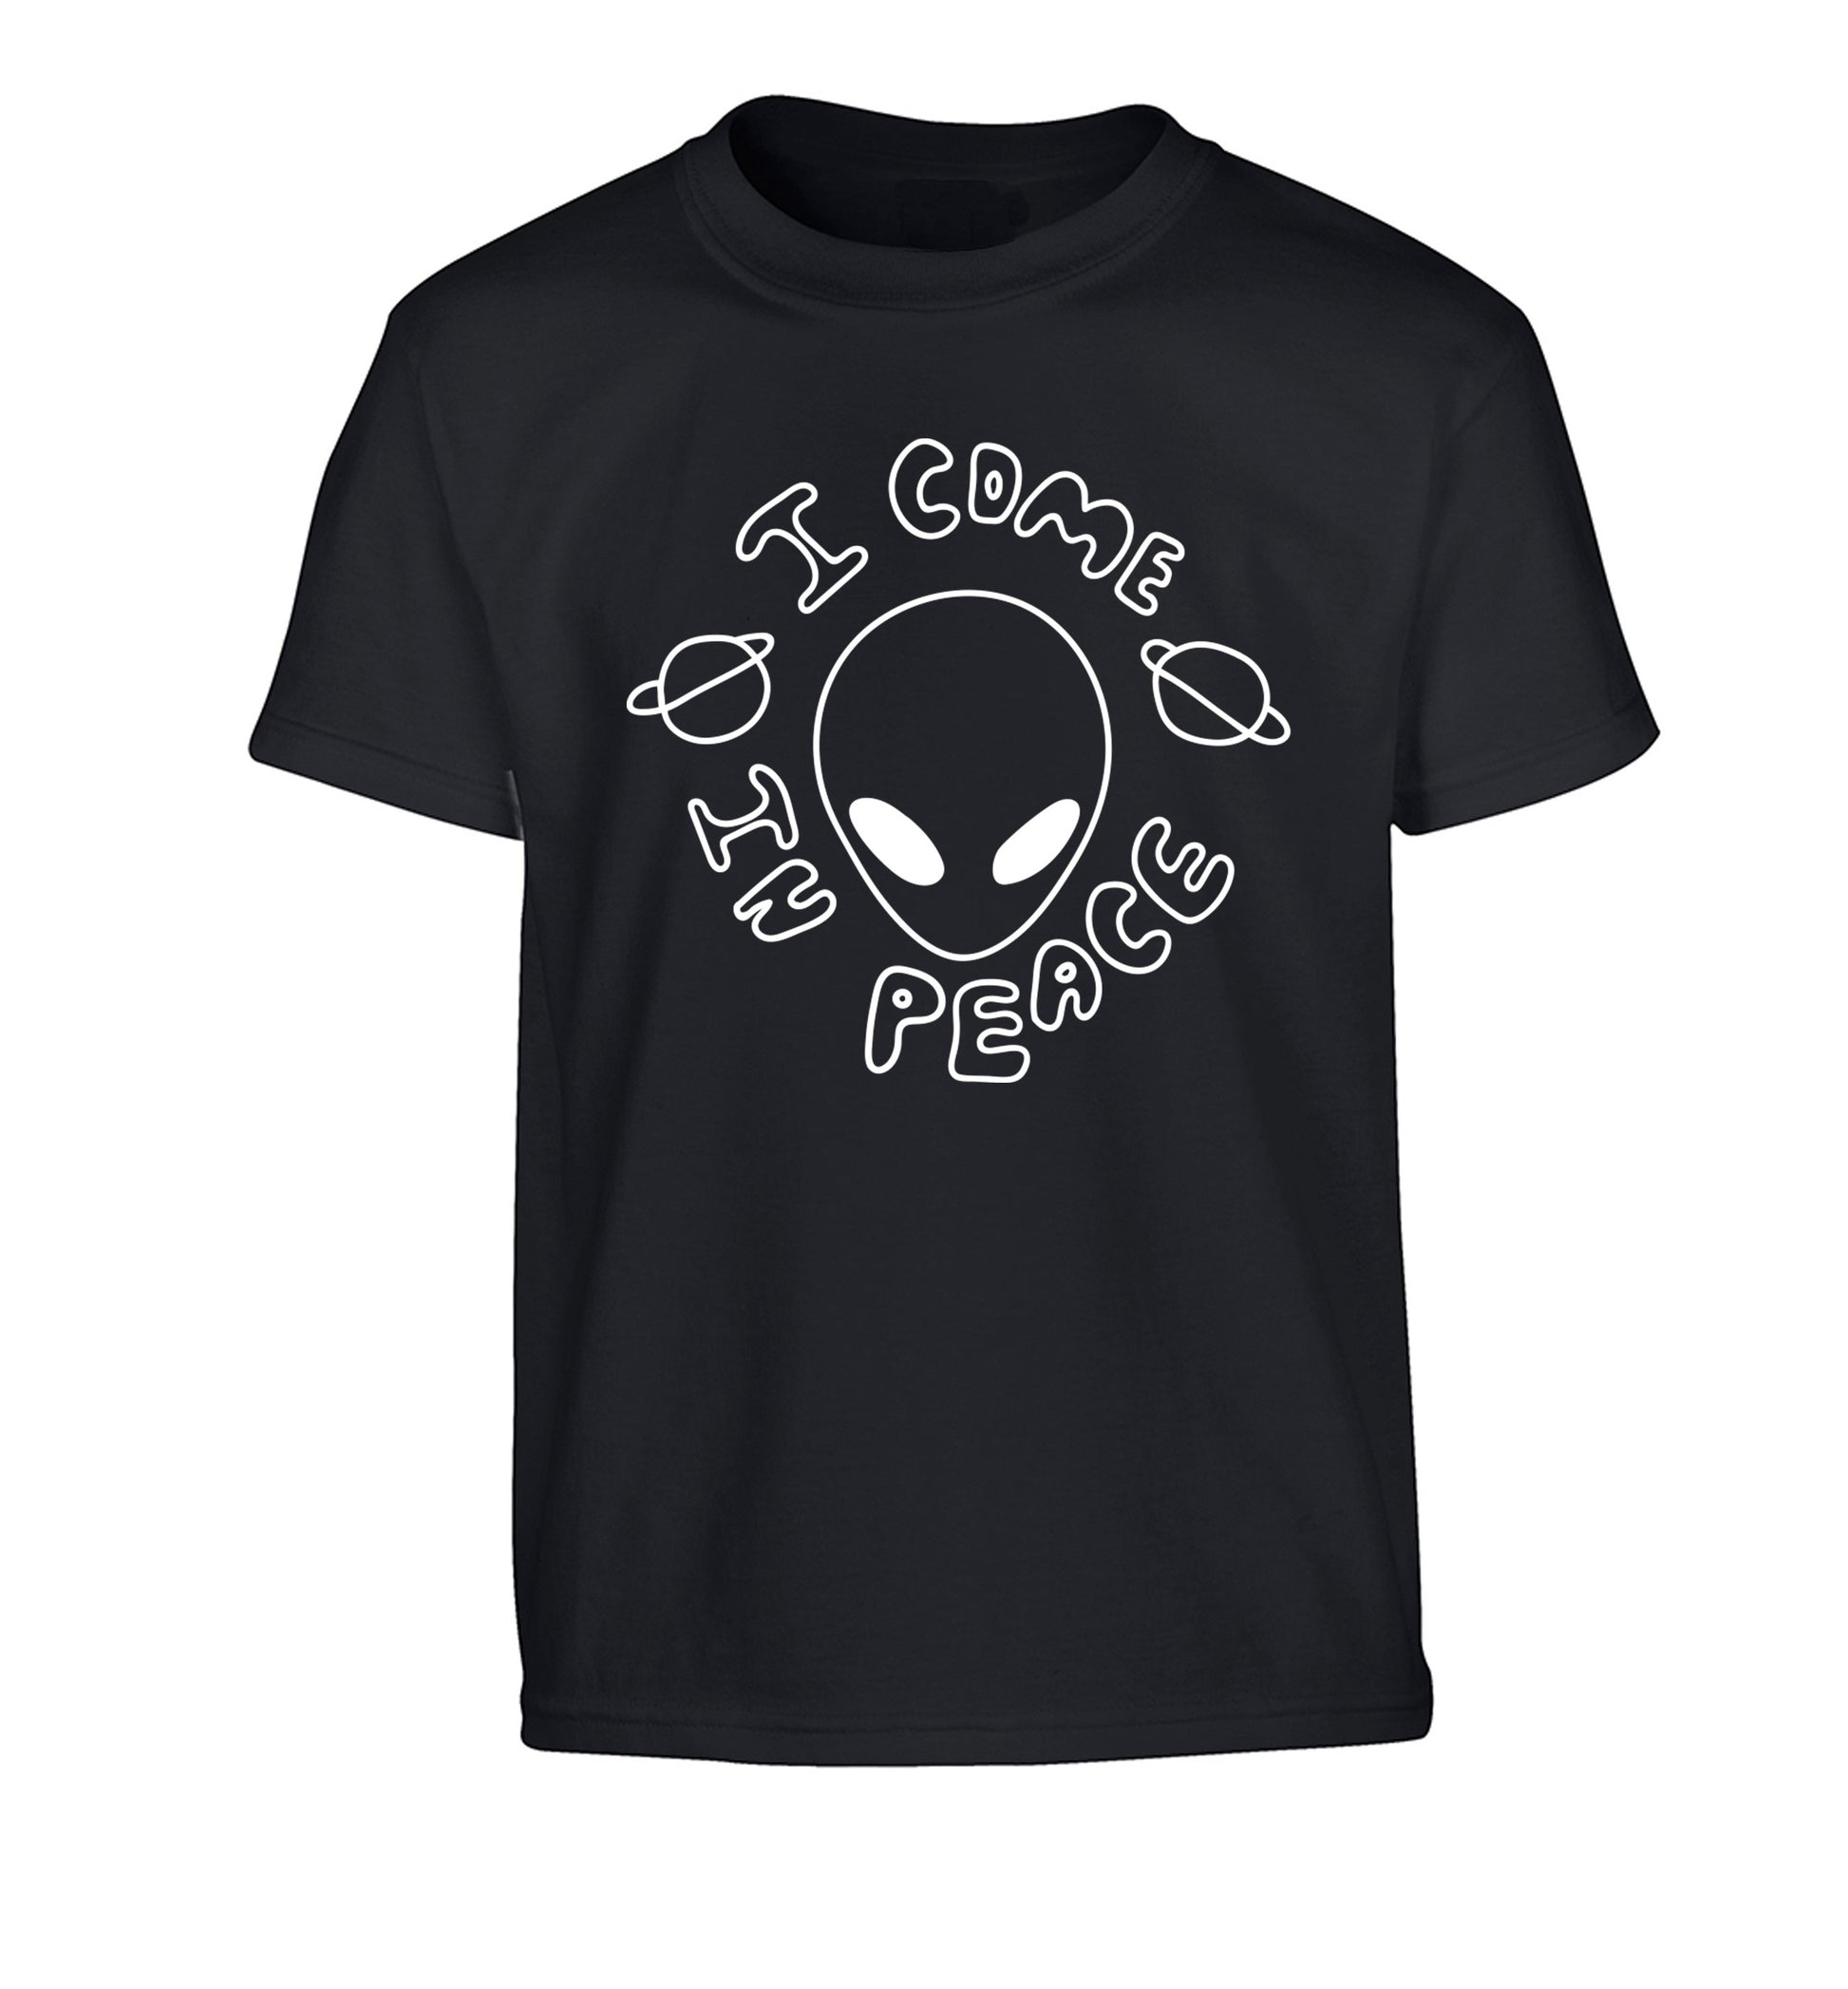 I come in peace Children's black Tshirt 12-14 Years